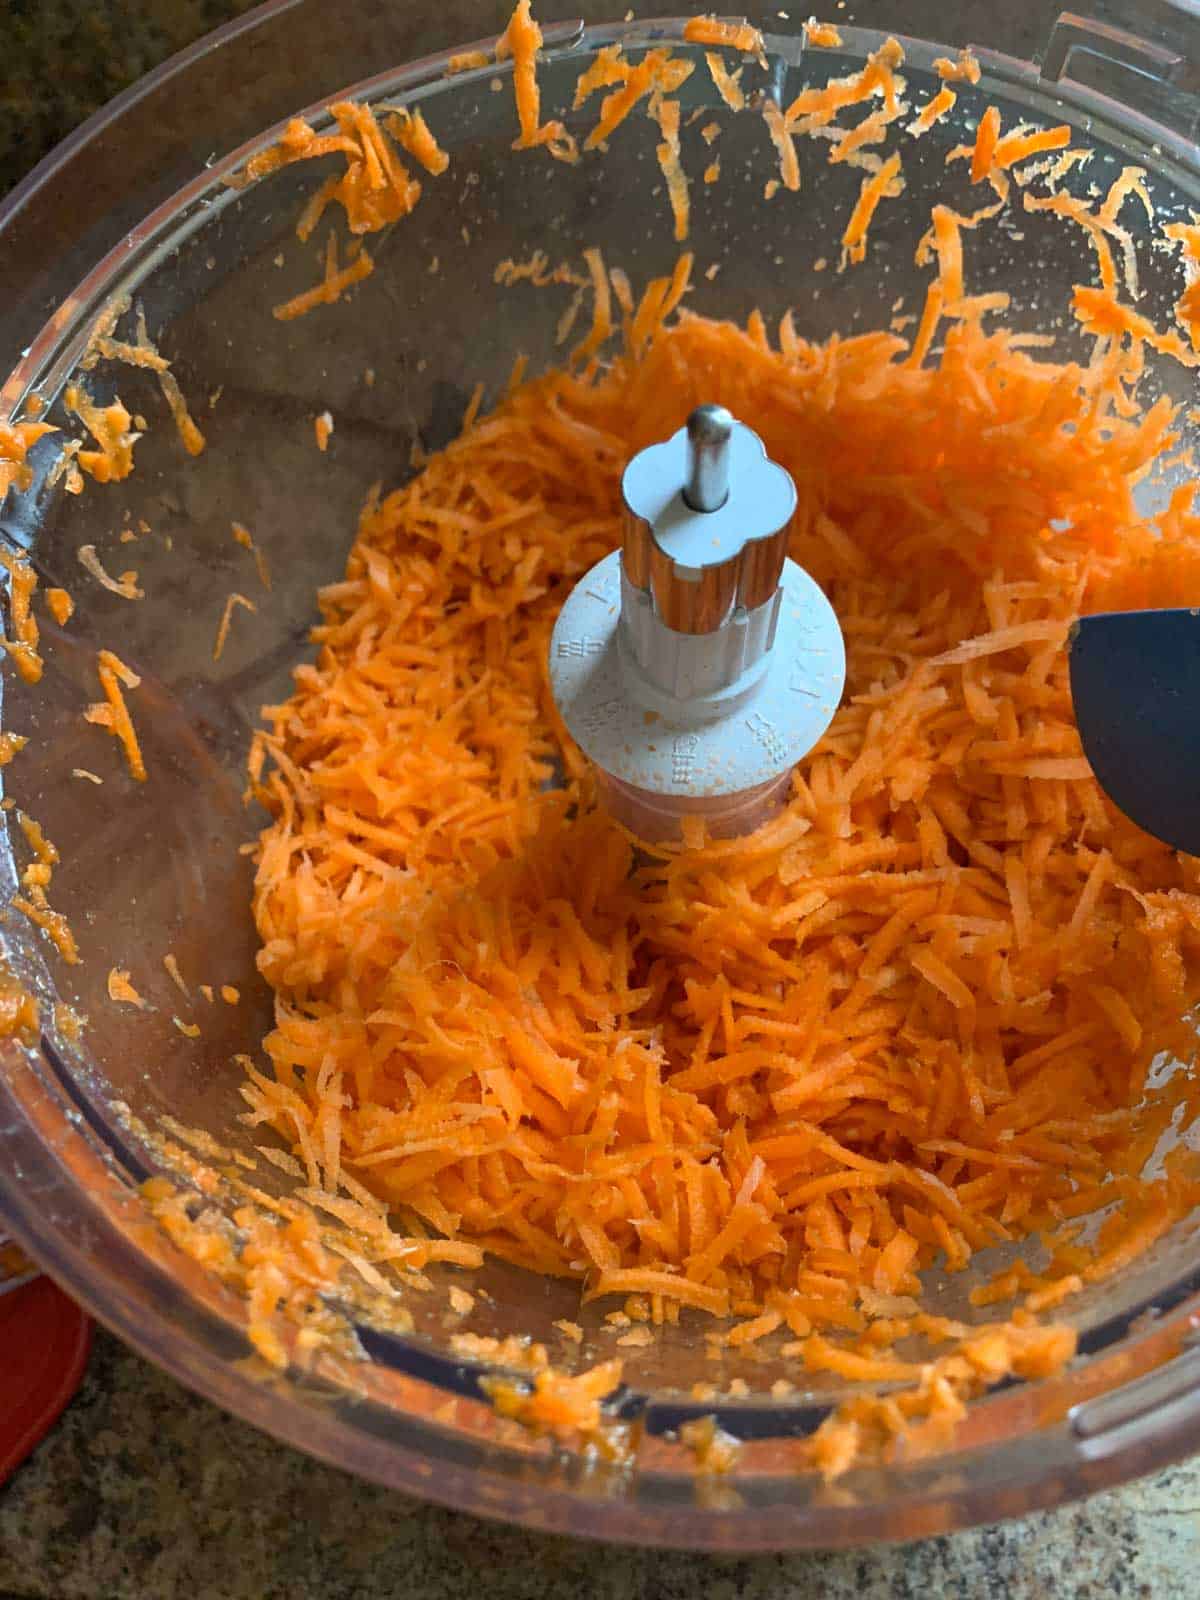 https://www.stetted.com/wp-content/uploads/2022/04/Carrot-Salad-Process-Photo-2.jpg